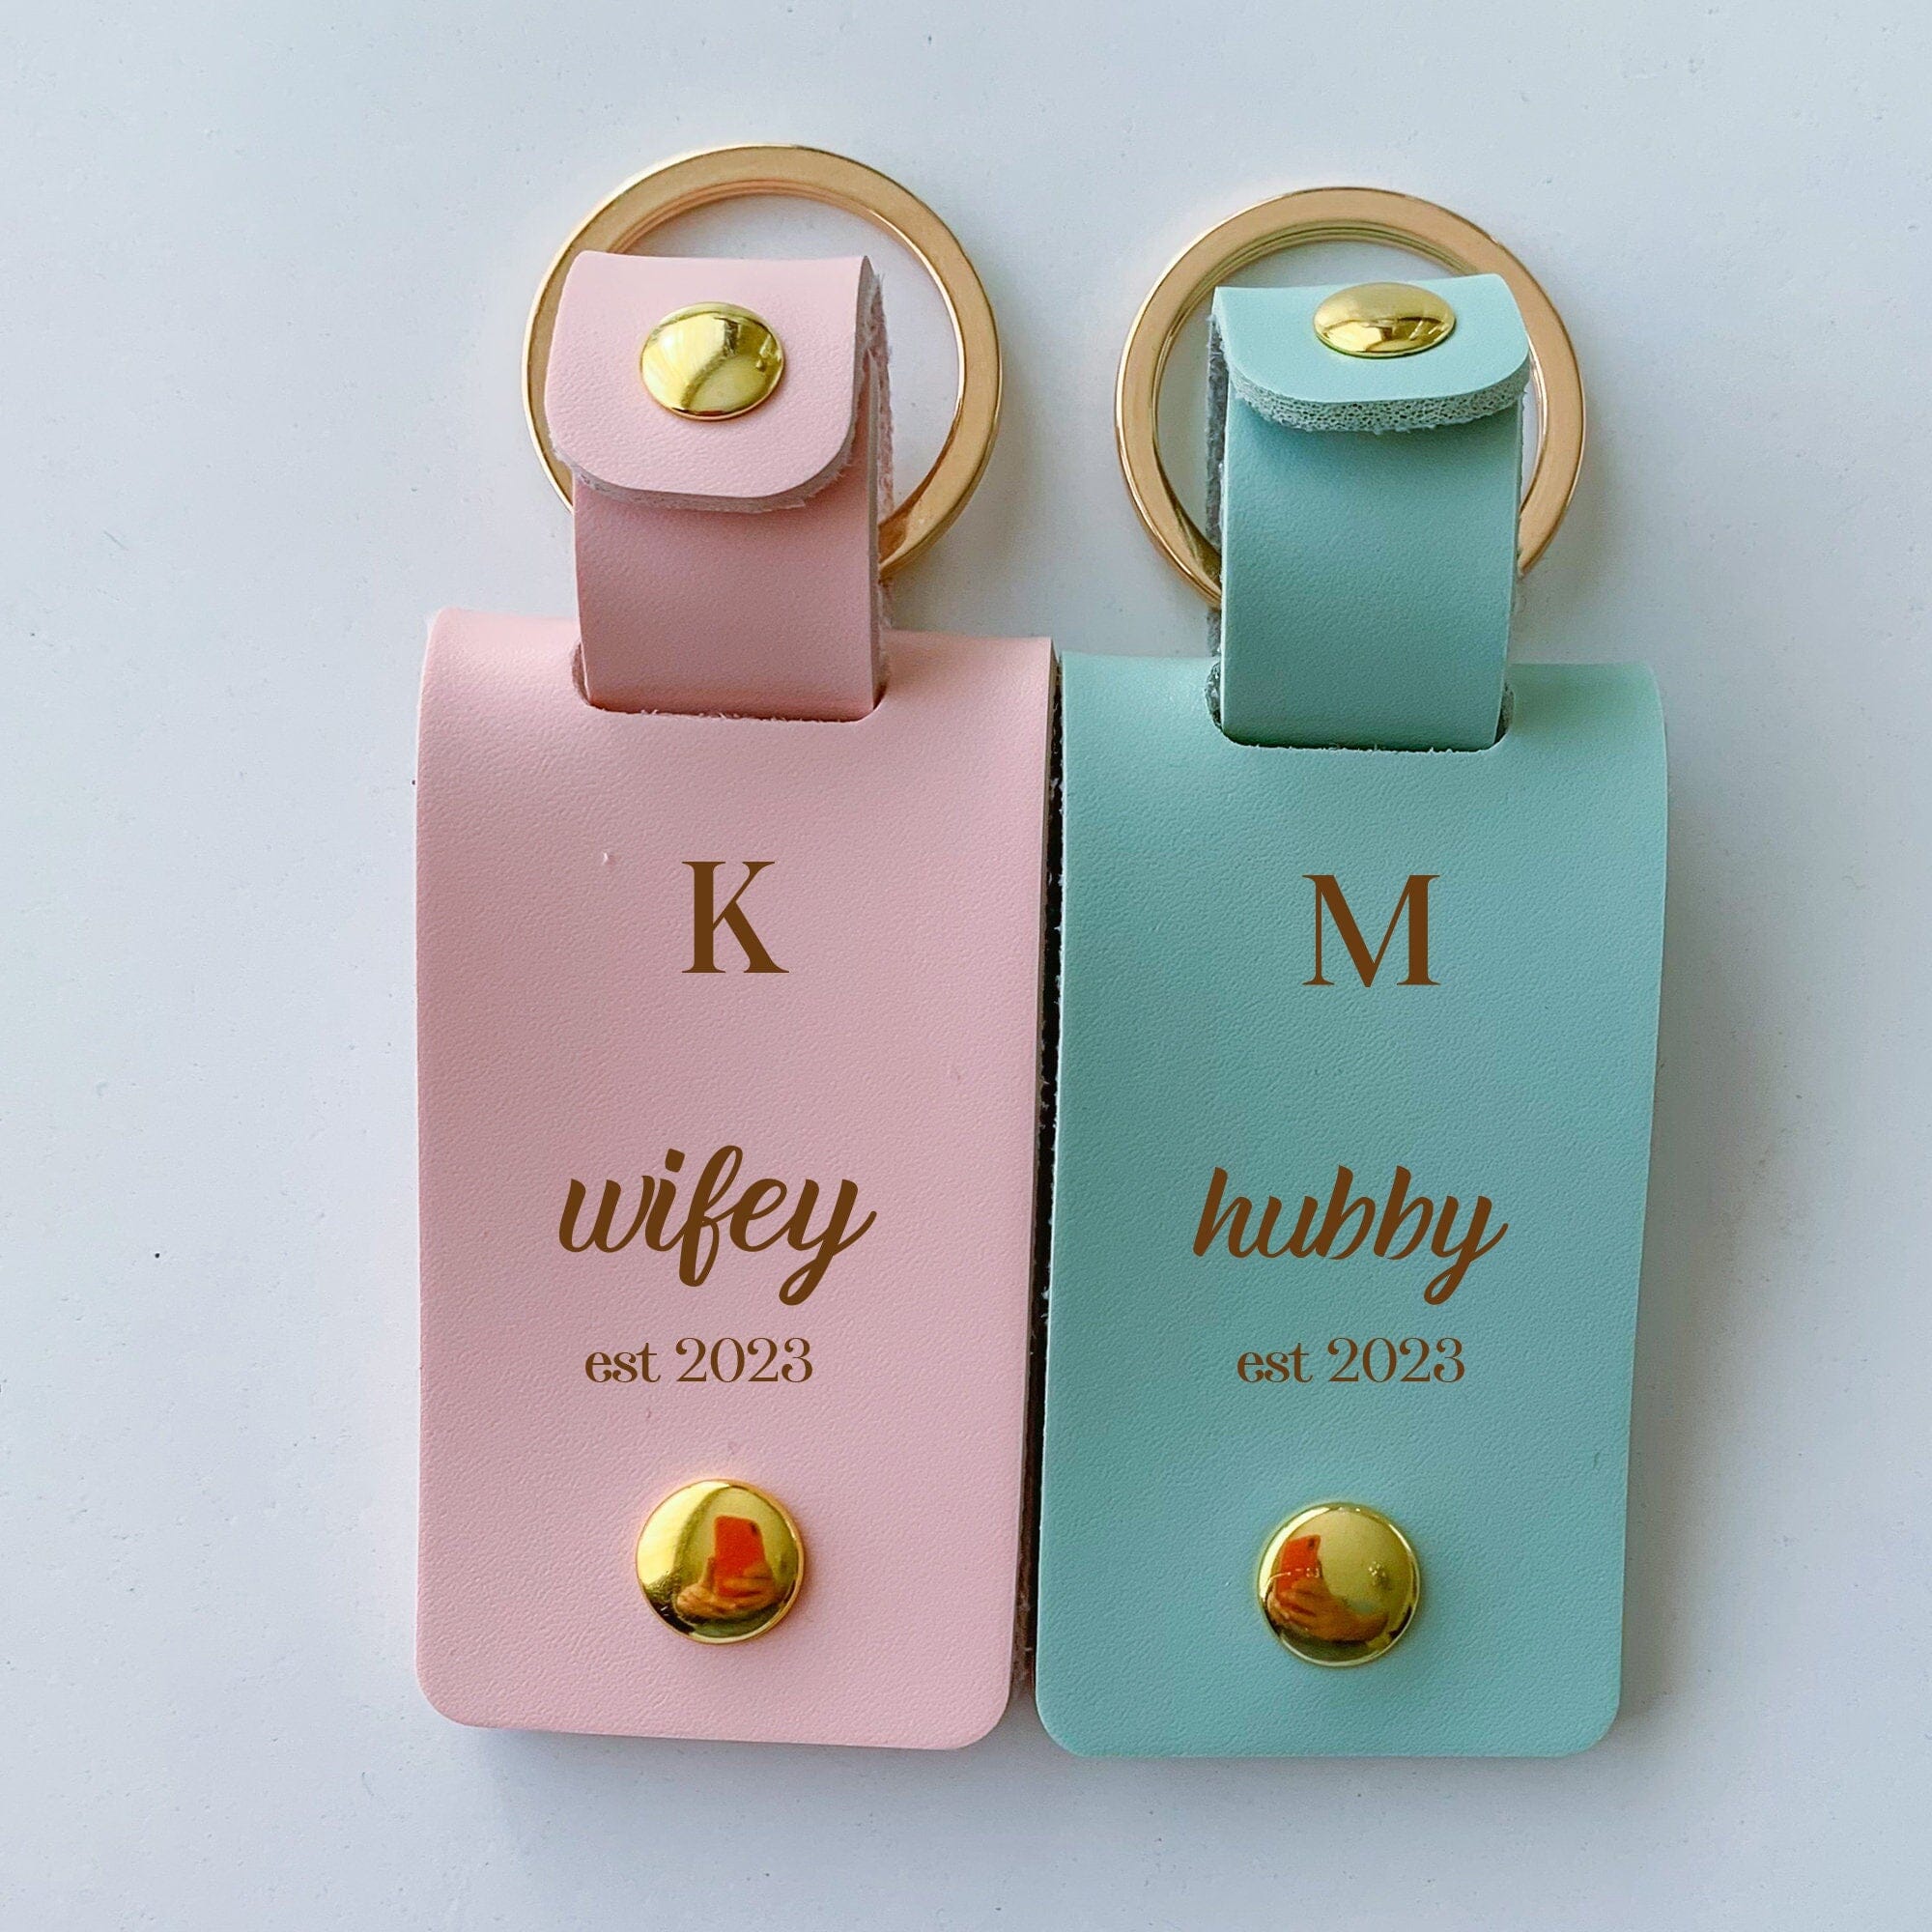 Wifey Hubby photo keyring, SET of 2, Couple matching keychain, Gift for her him